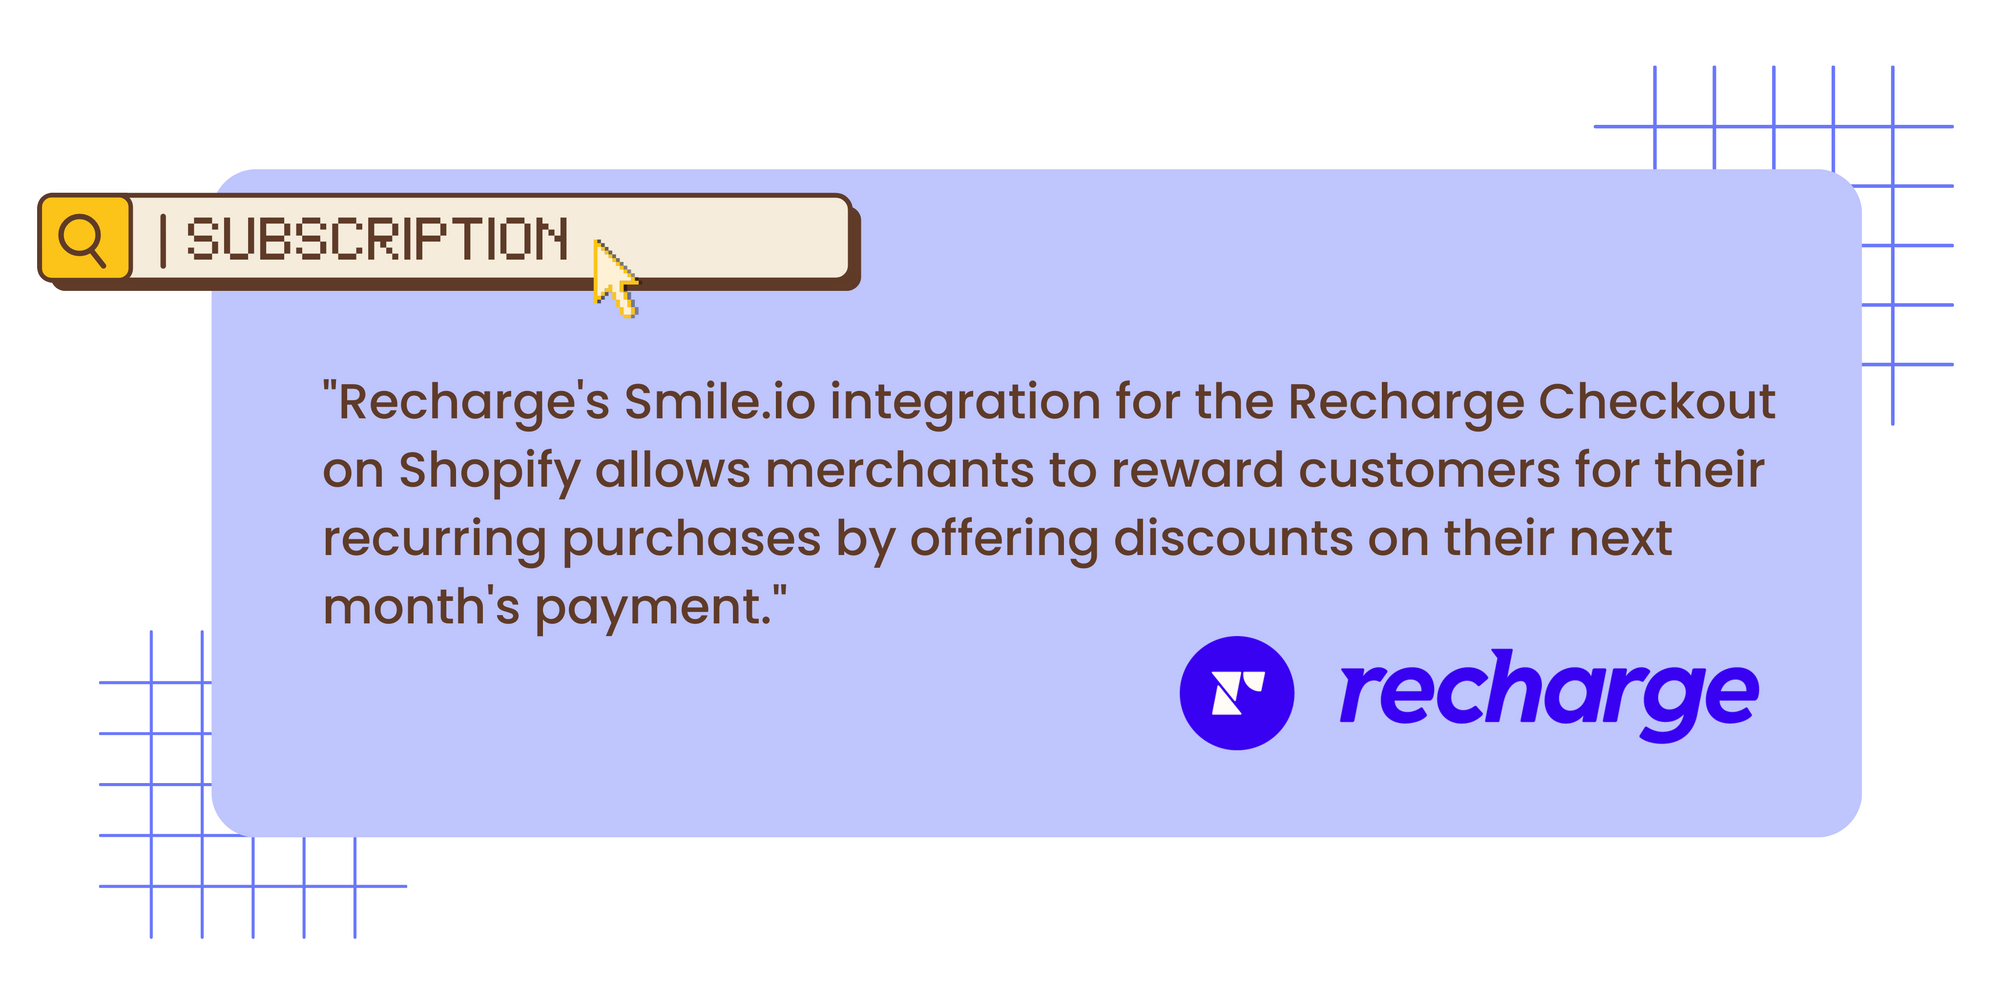 graphic on a quote from recharge on the recharge and smile.io integration